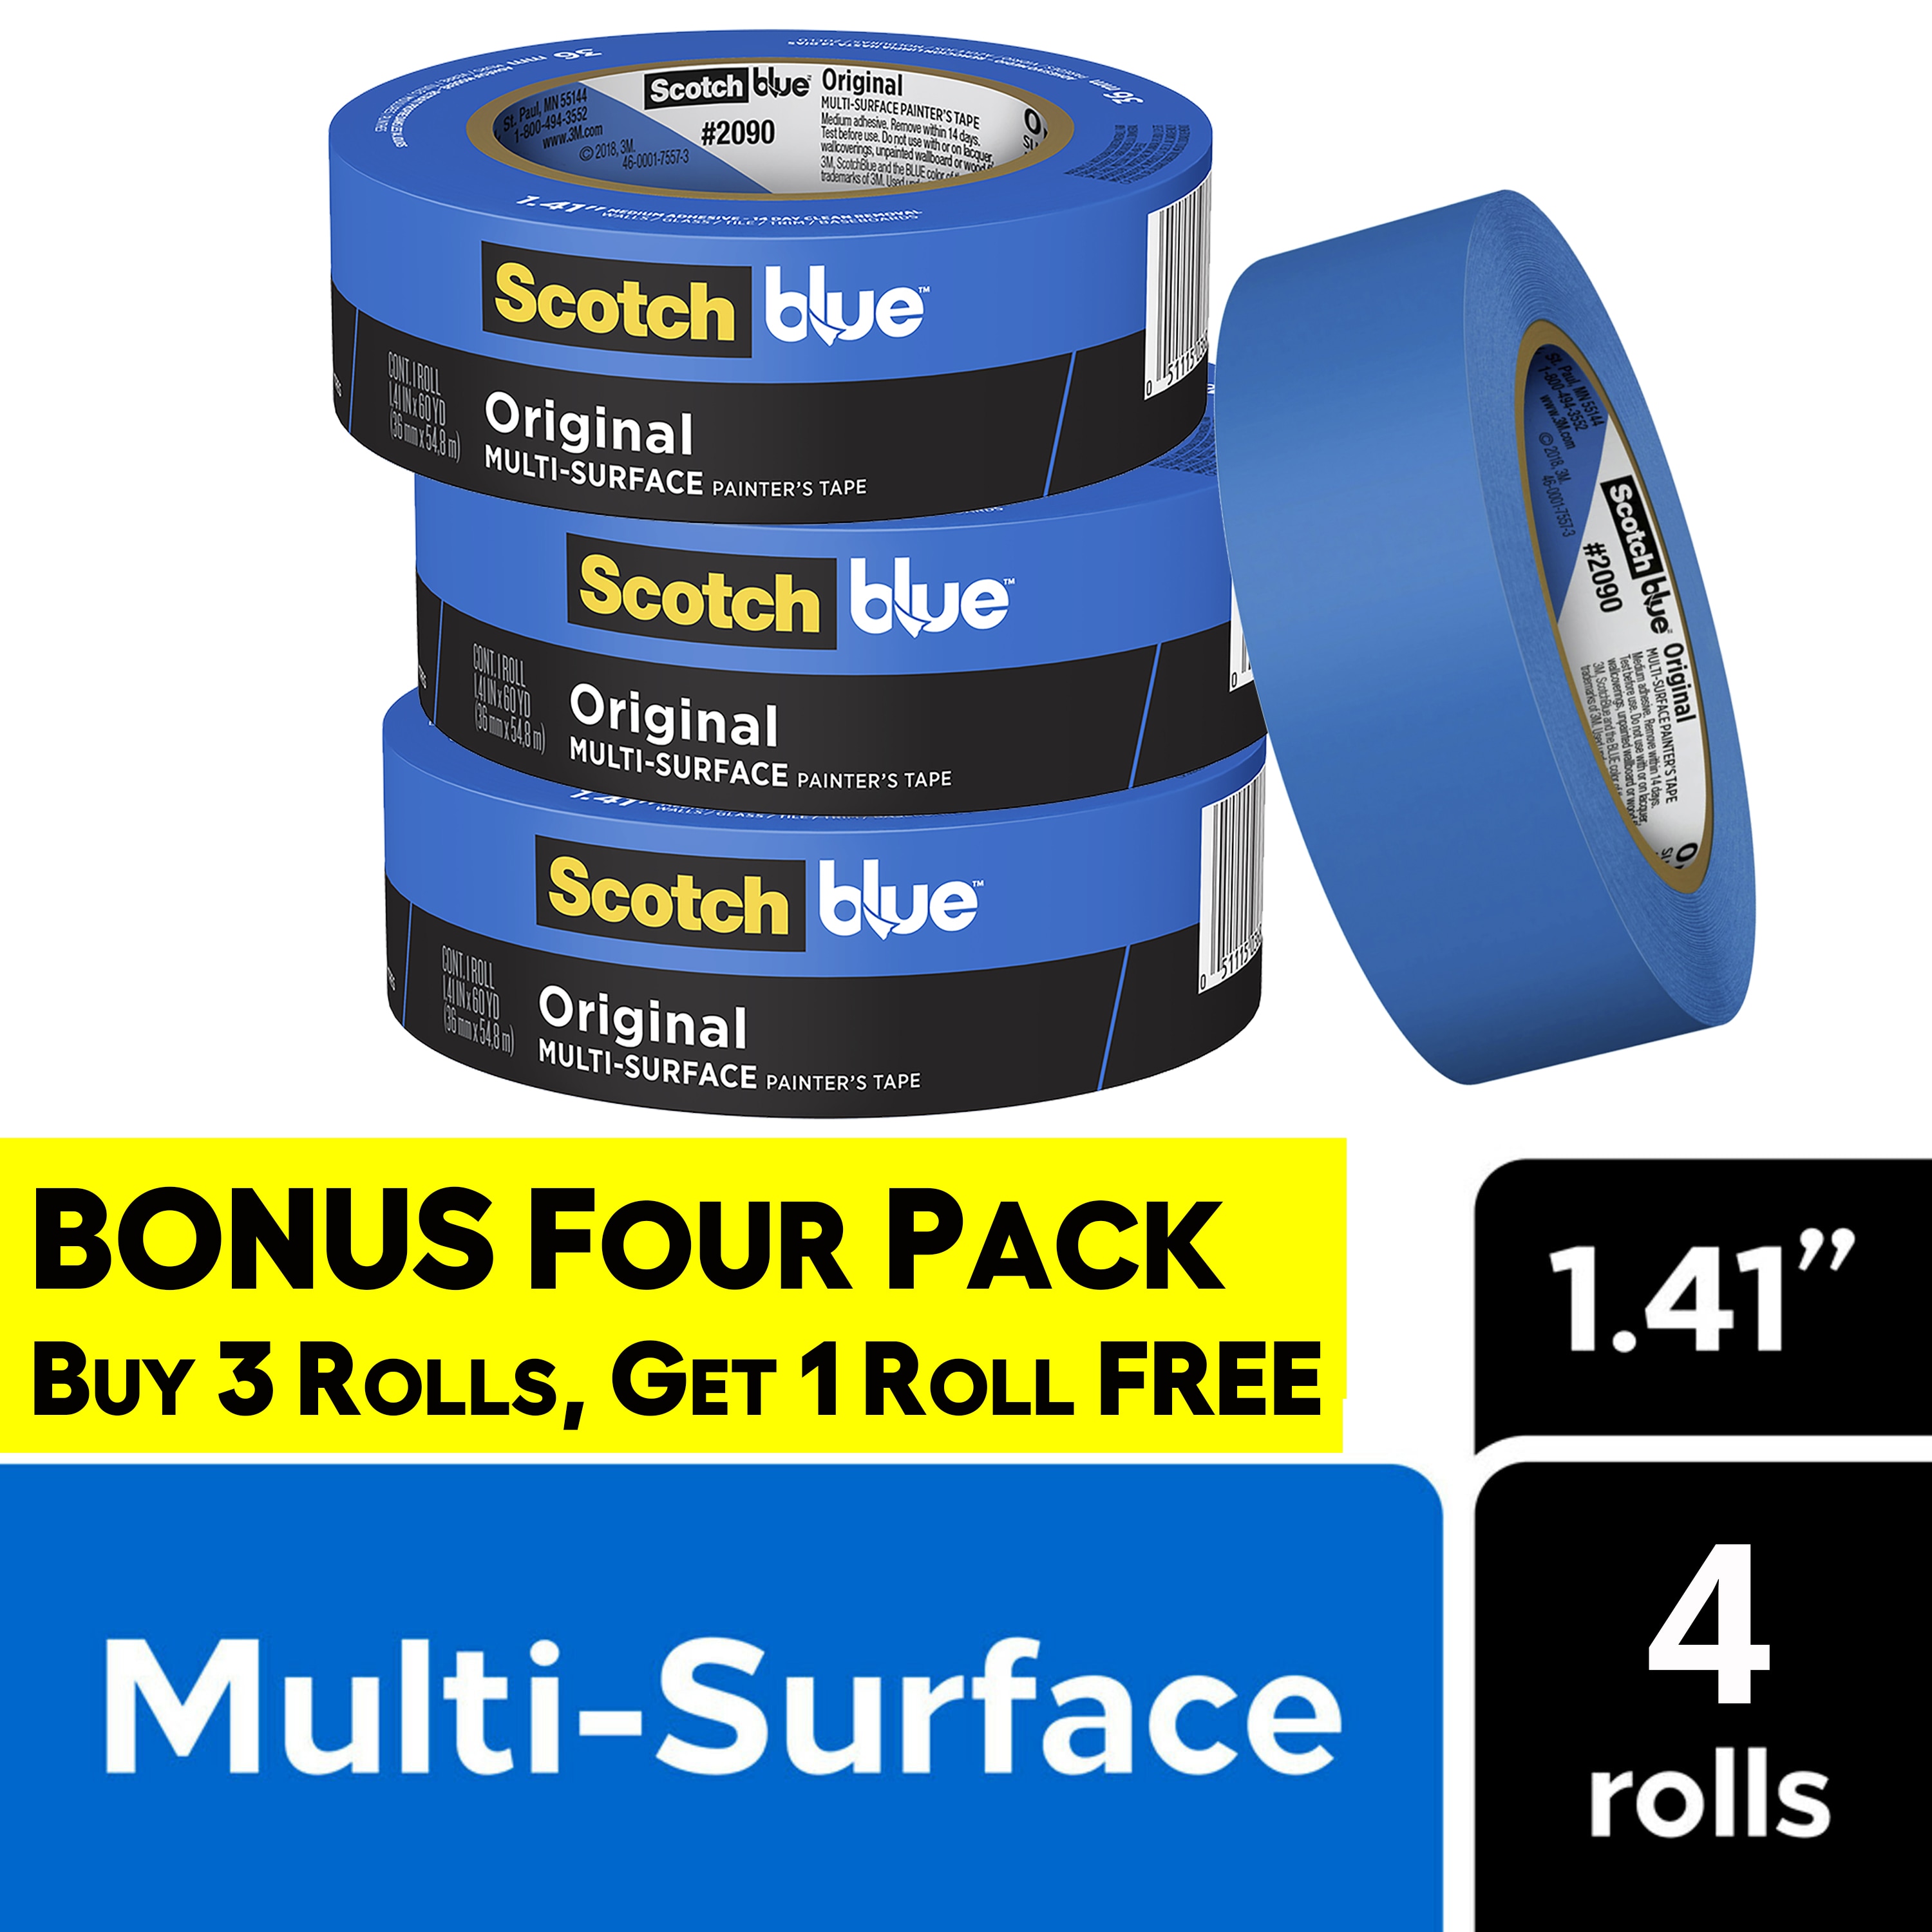 3M Scotch Fine Line Tape Scotch™ Fine Line Tape:Facility Safety and